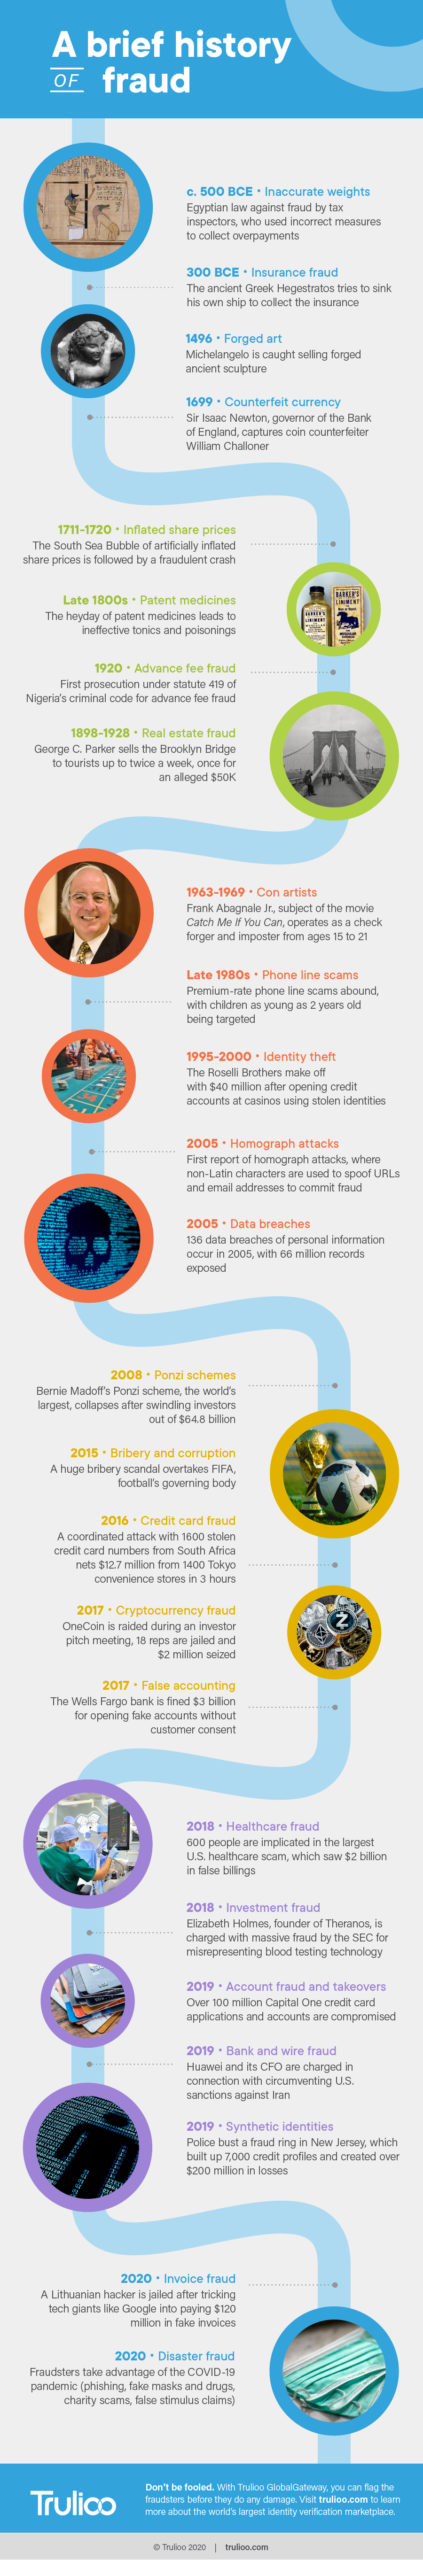 Trulioo infographic - History of Fraud